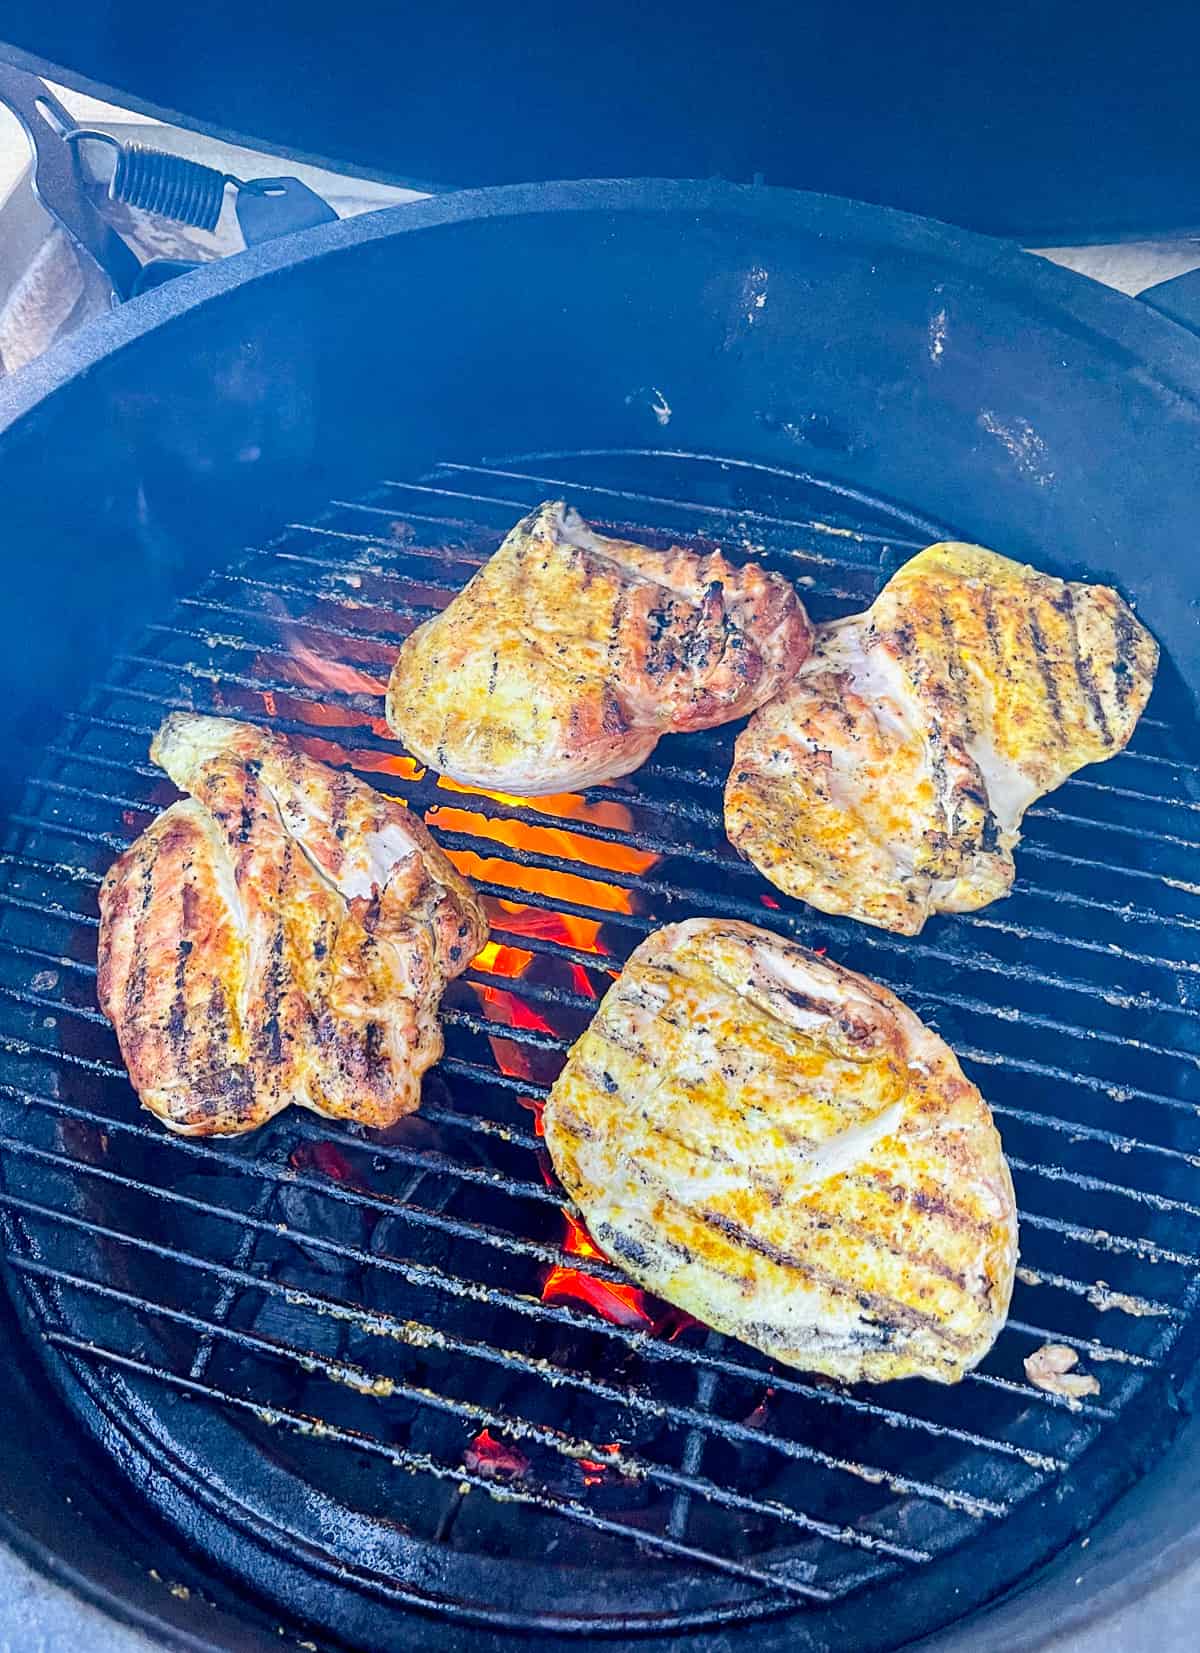 A Big Green Egg with some grilled curry chicken breasts.